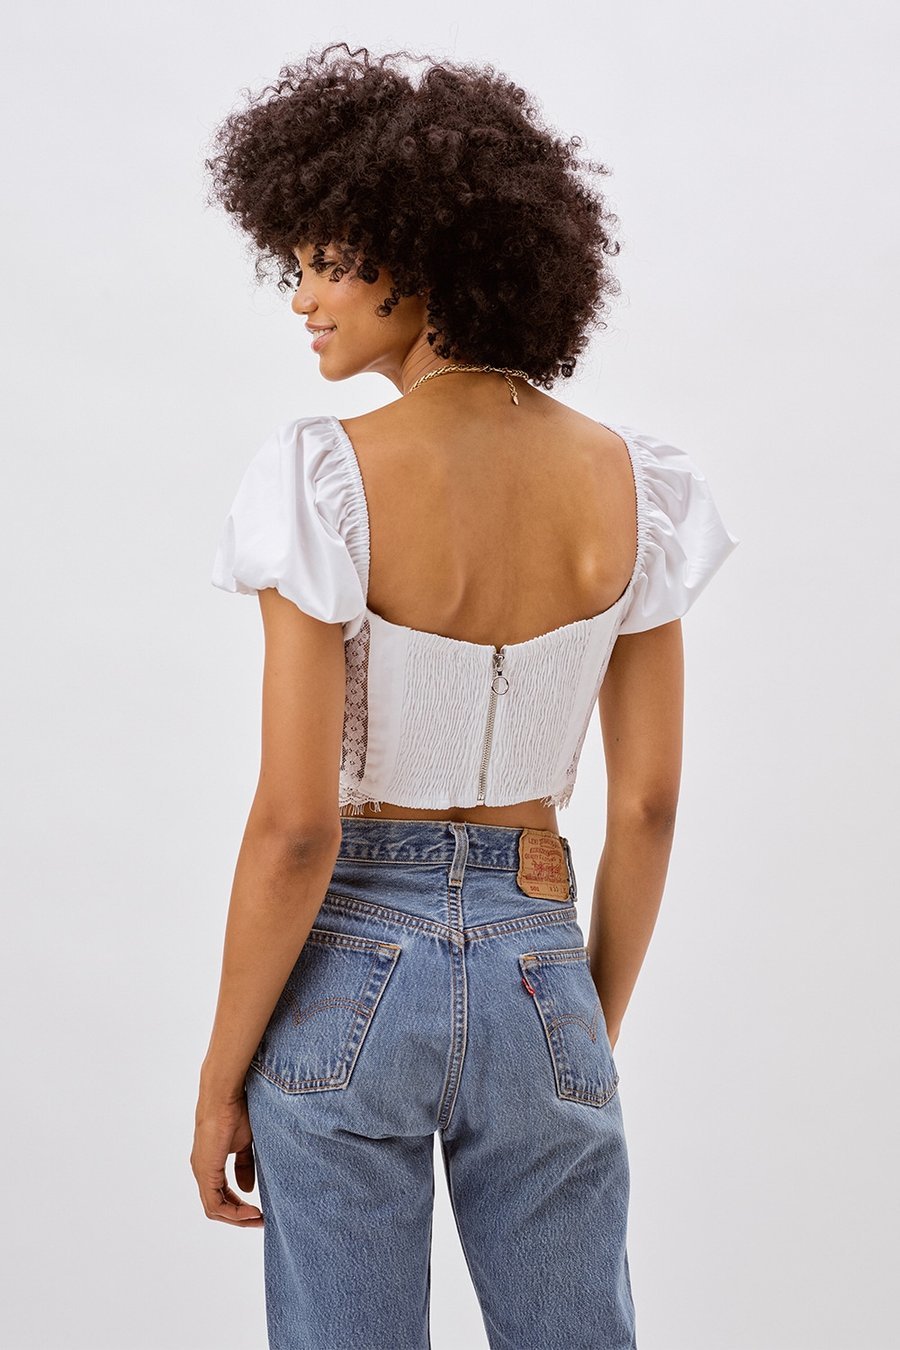 OOTDGIRL Hot Sexy Solid Bandage Tie Up Vintage Frill Lace Camis Tops Female Women Summer White V Neck Strap Crop Top Party Club